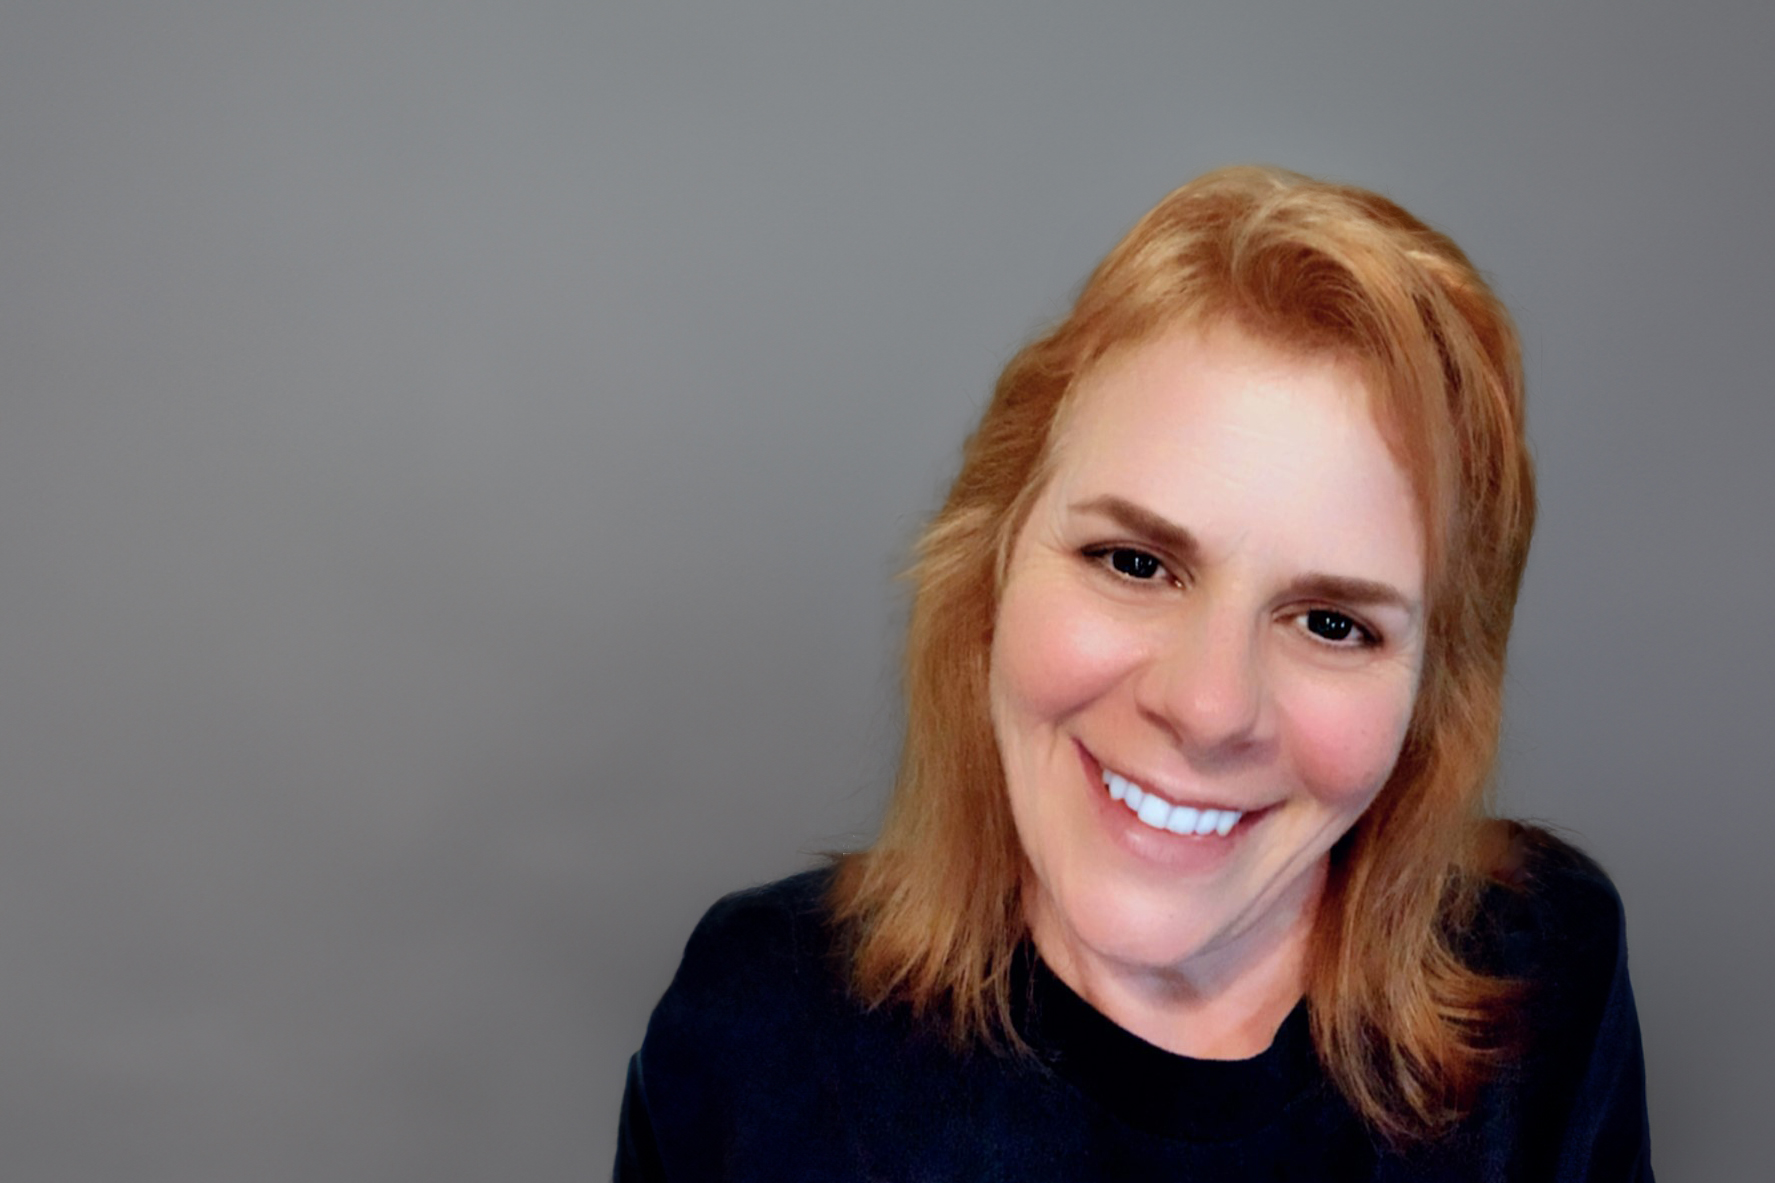 Laurie Martin, MBA student, is pictured in a black shirt on a gray background.